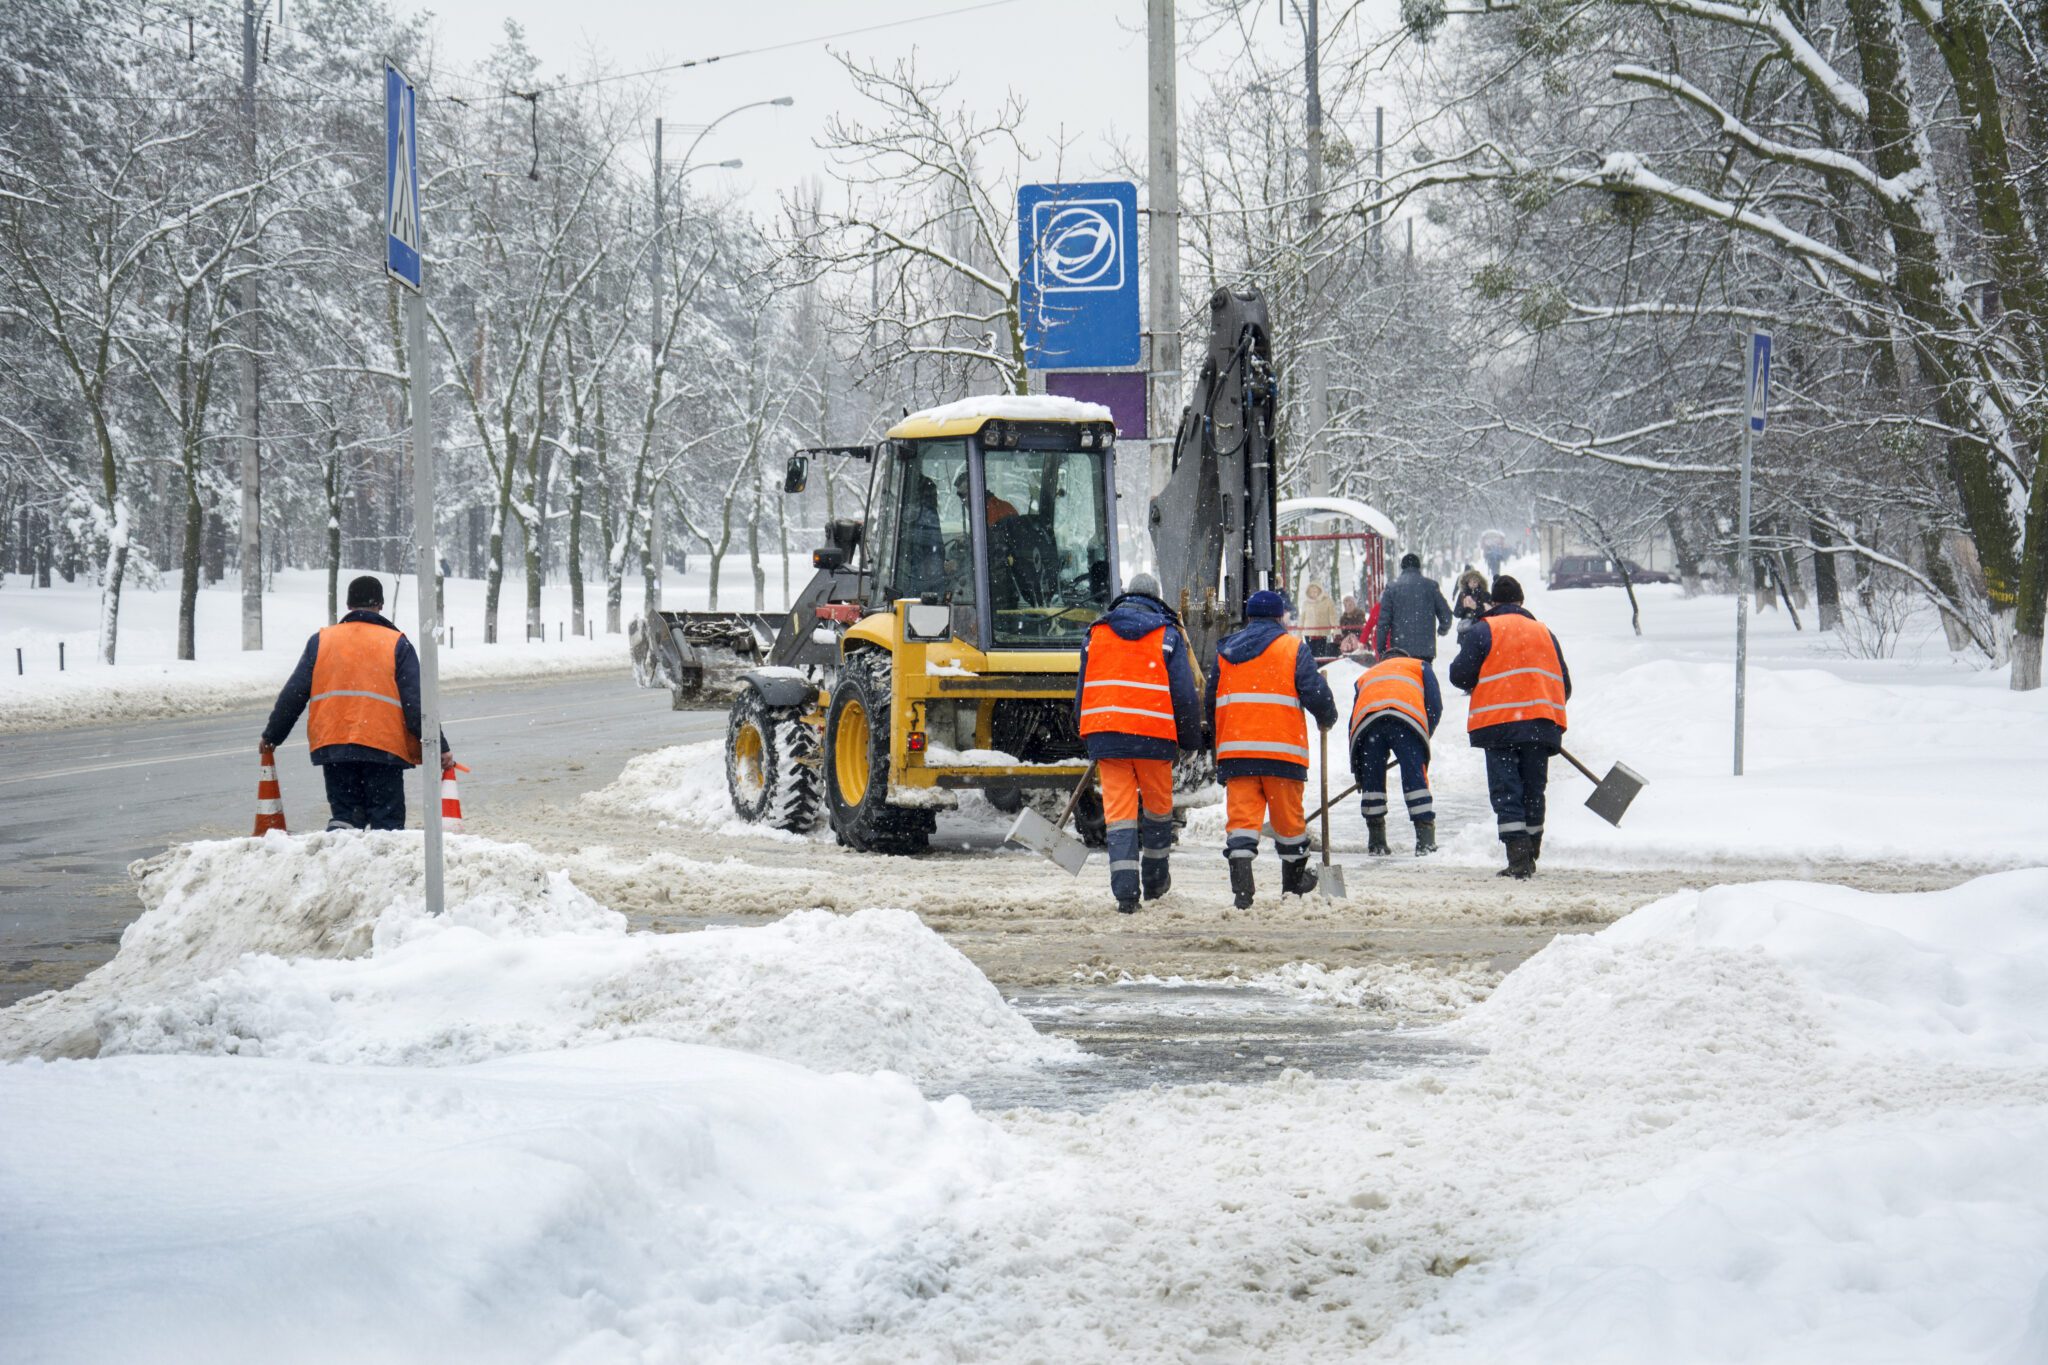 Cold weather workers compensation claims scaled